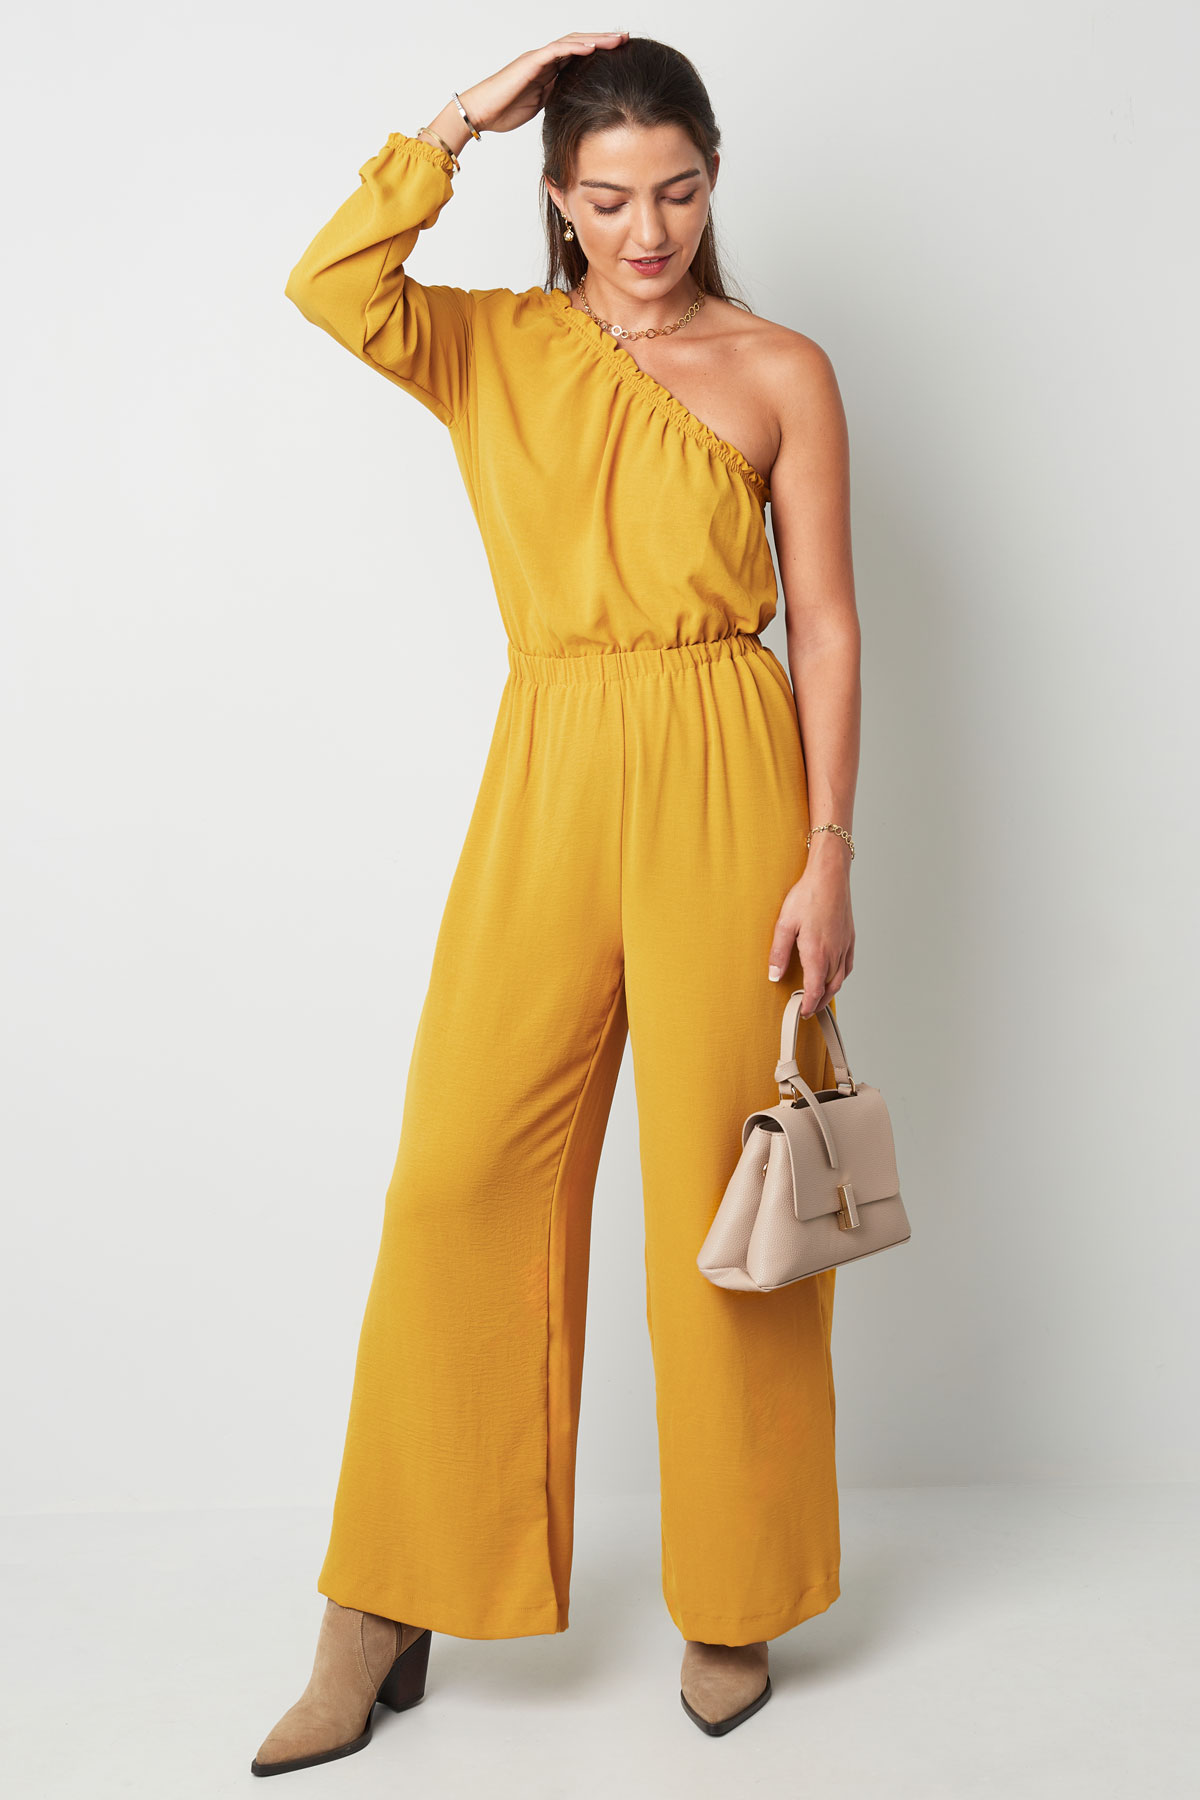 Jumpsuit one-shoulder - mustard yellow Picture8